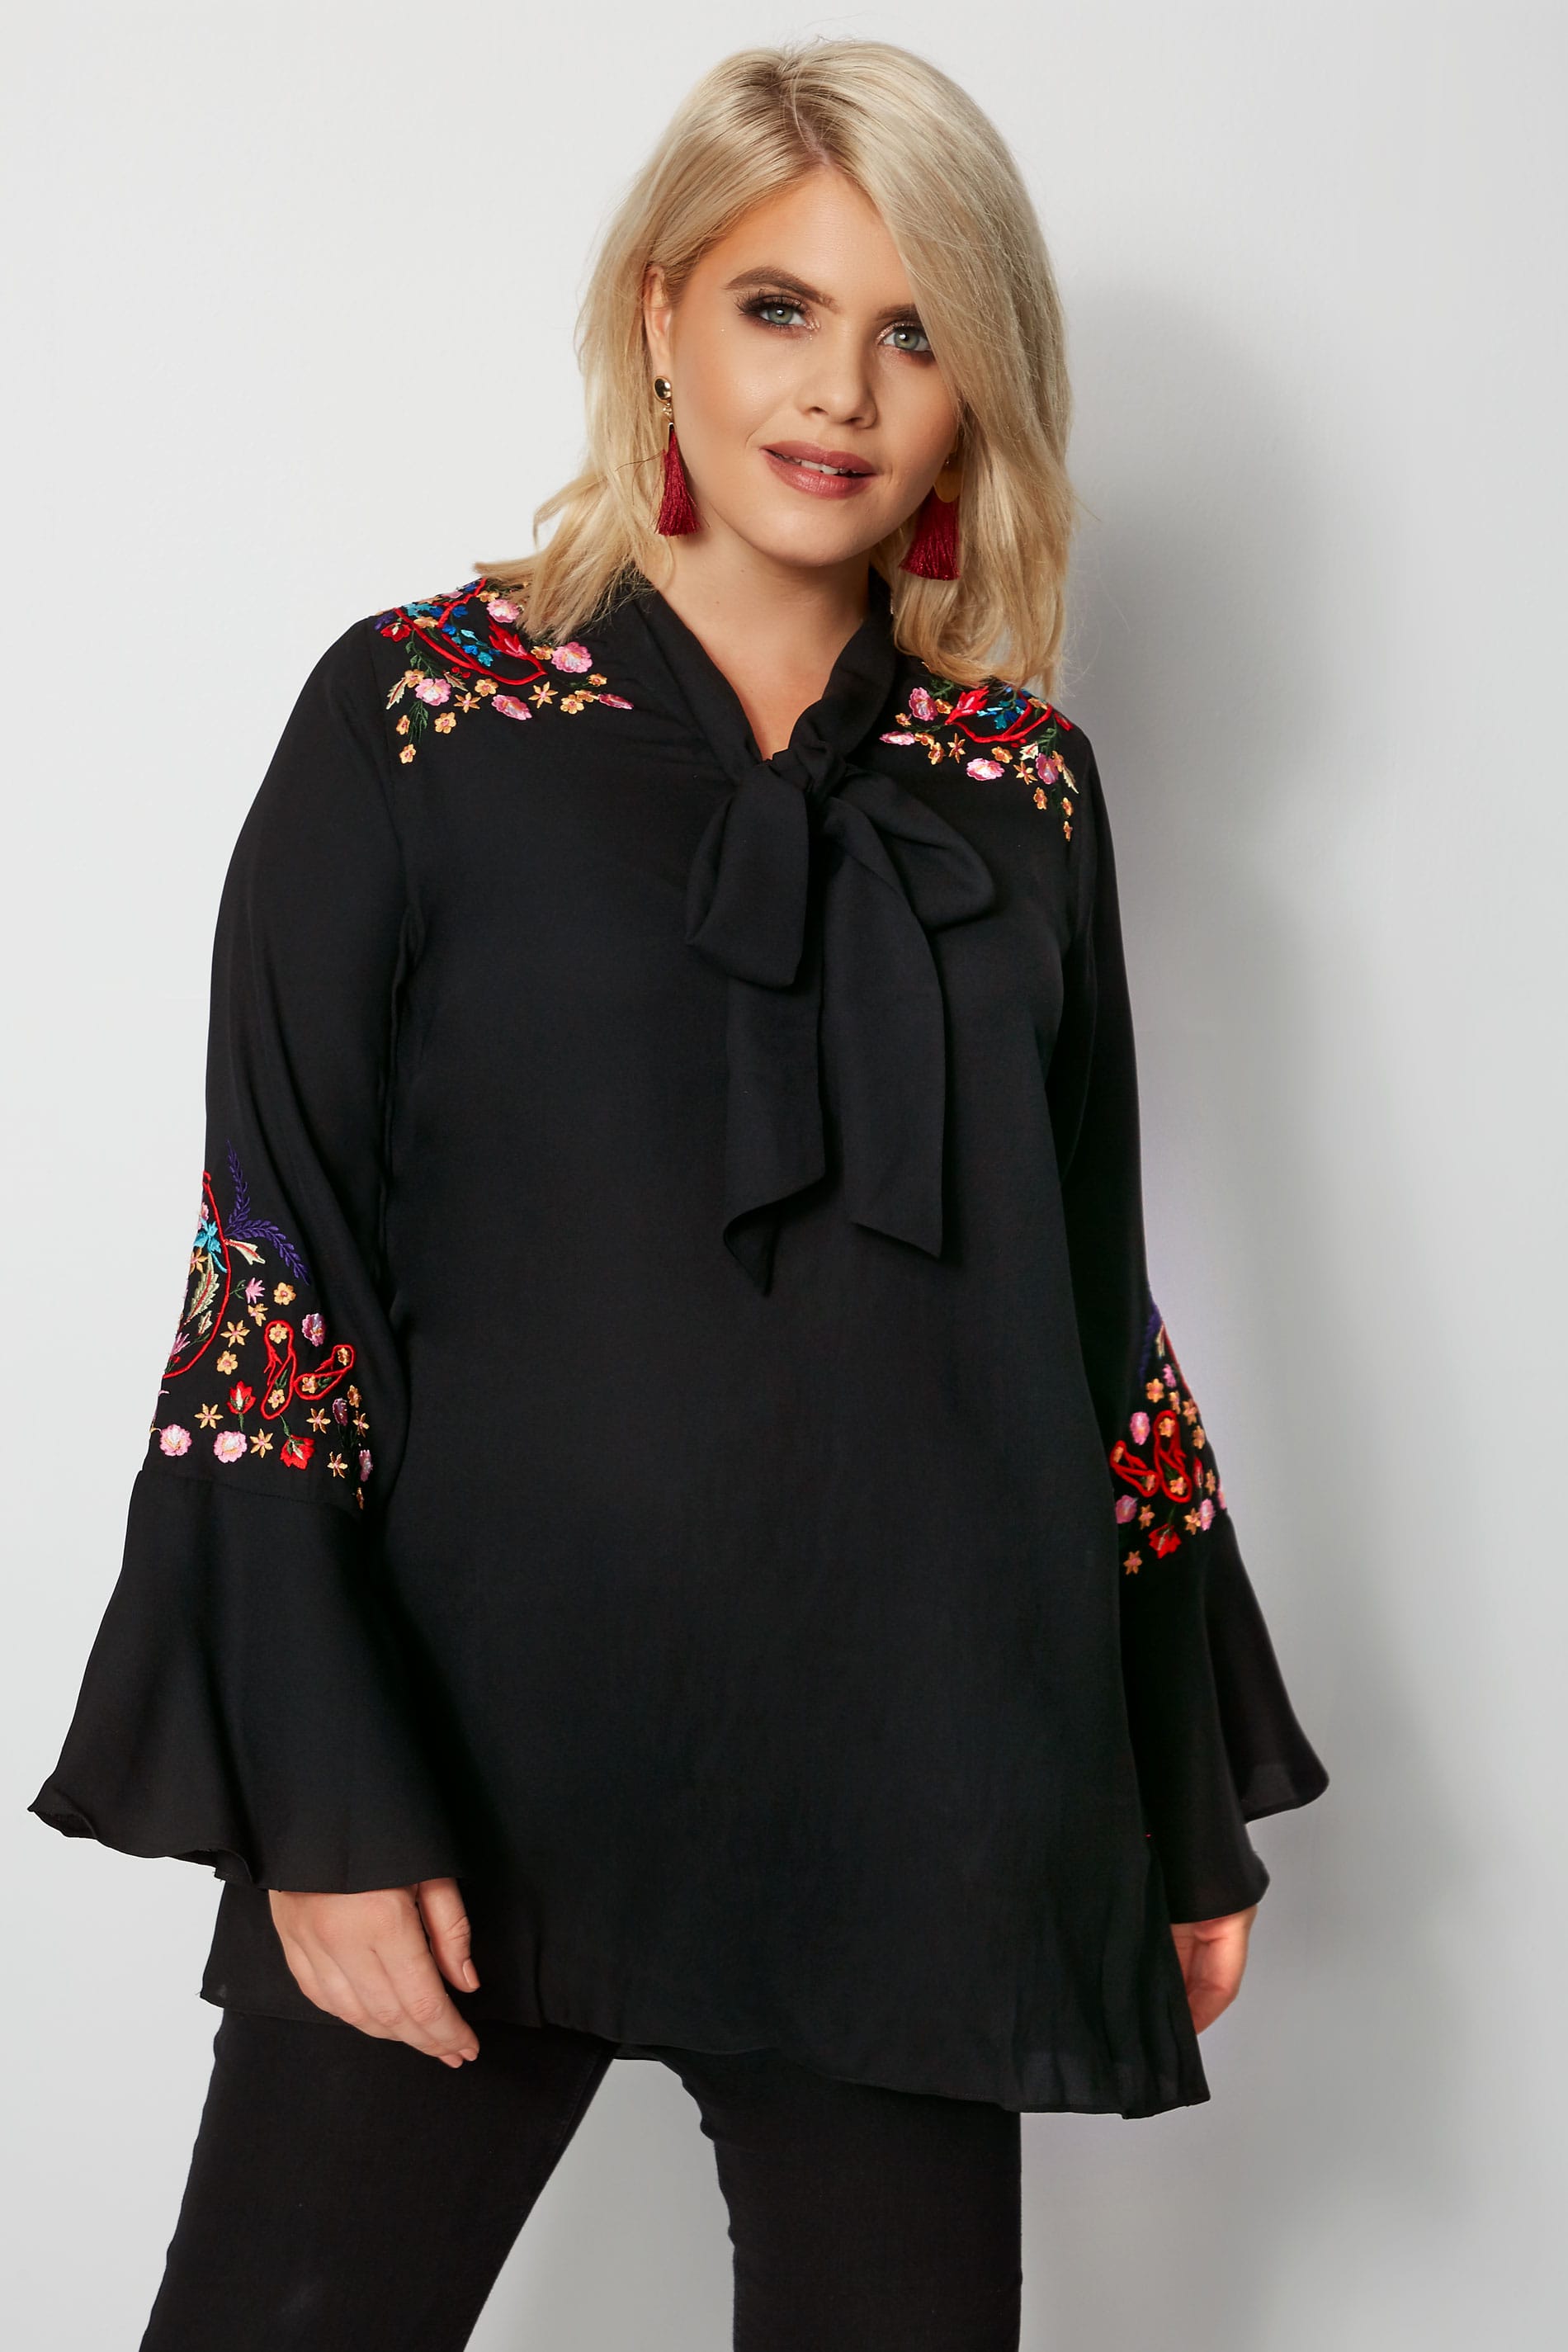 Yours London Black Floral Embroidered Pussy Bow Blouse Plus Size 16 To 32